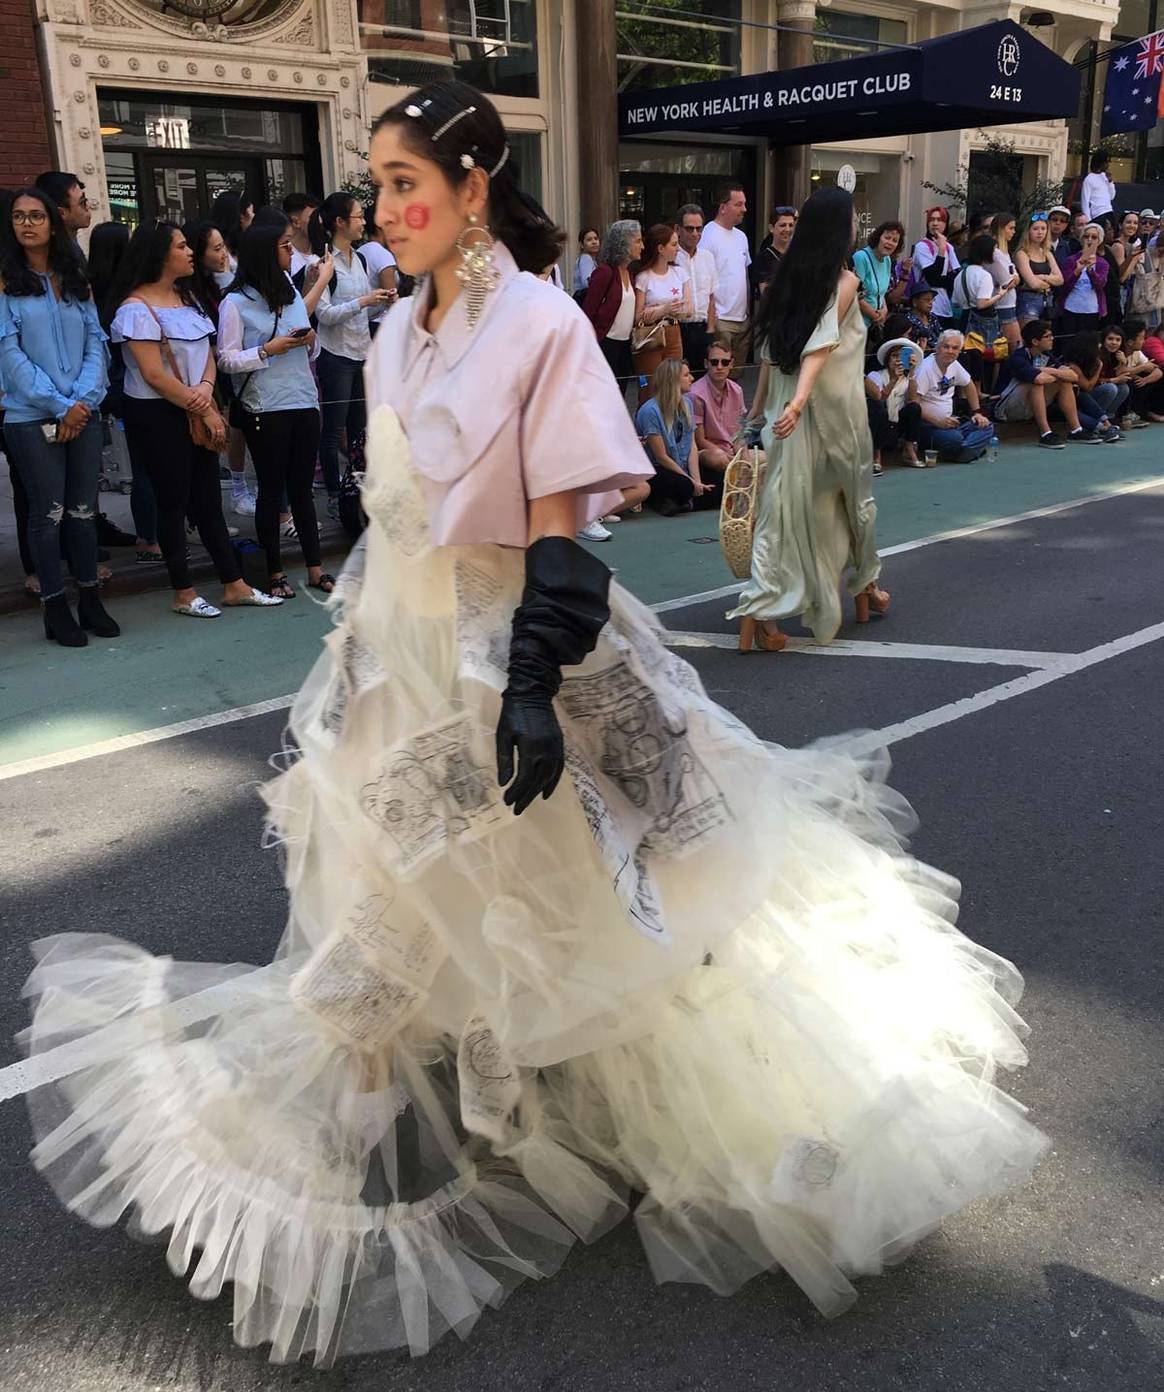 Parsons occupies 13th St for its first ever street fashion show